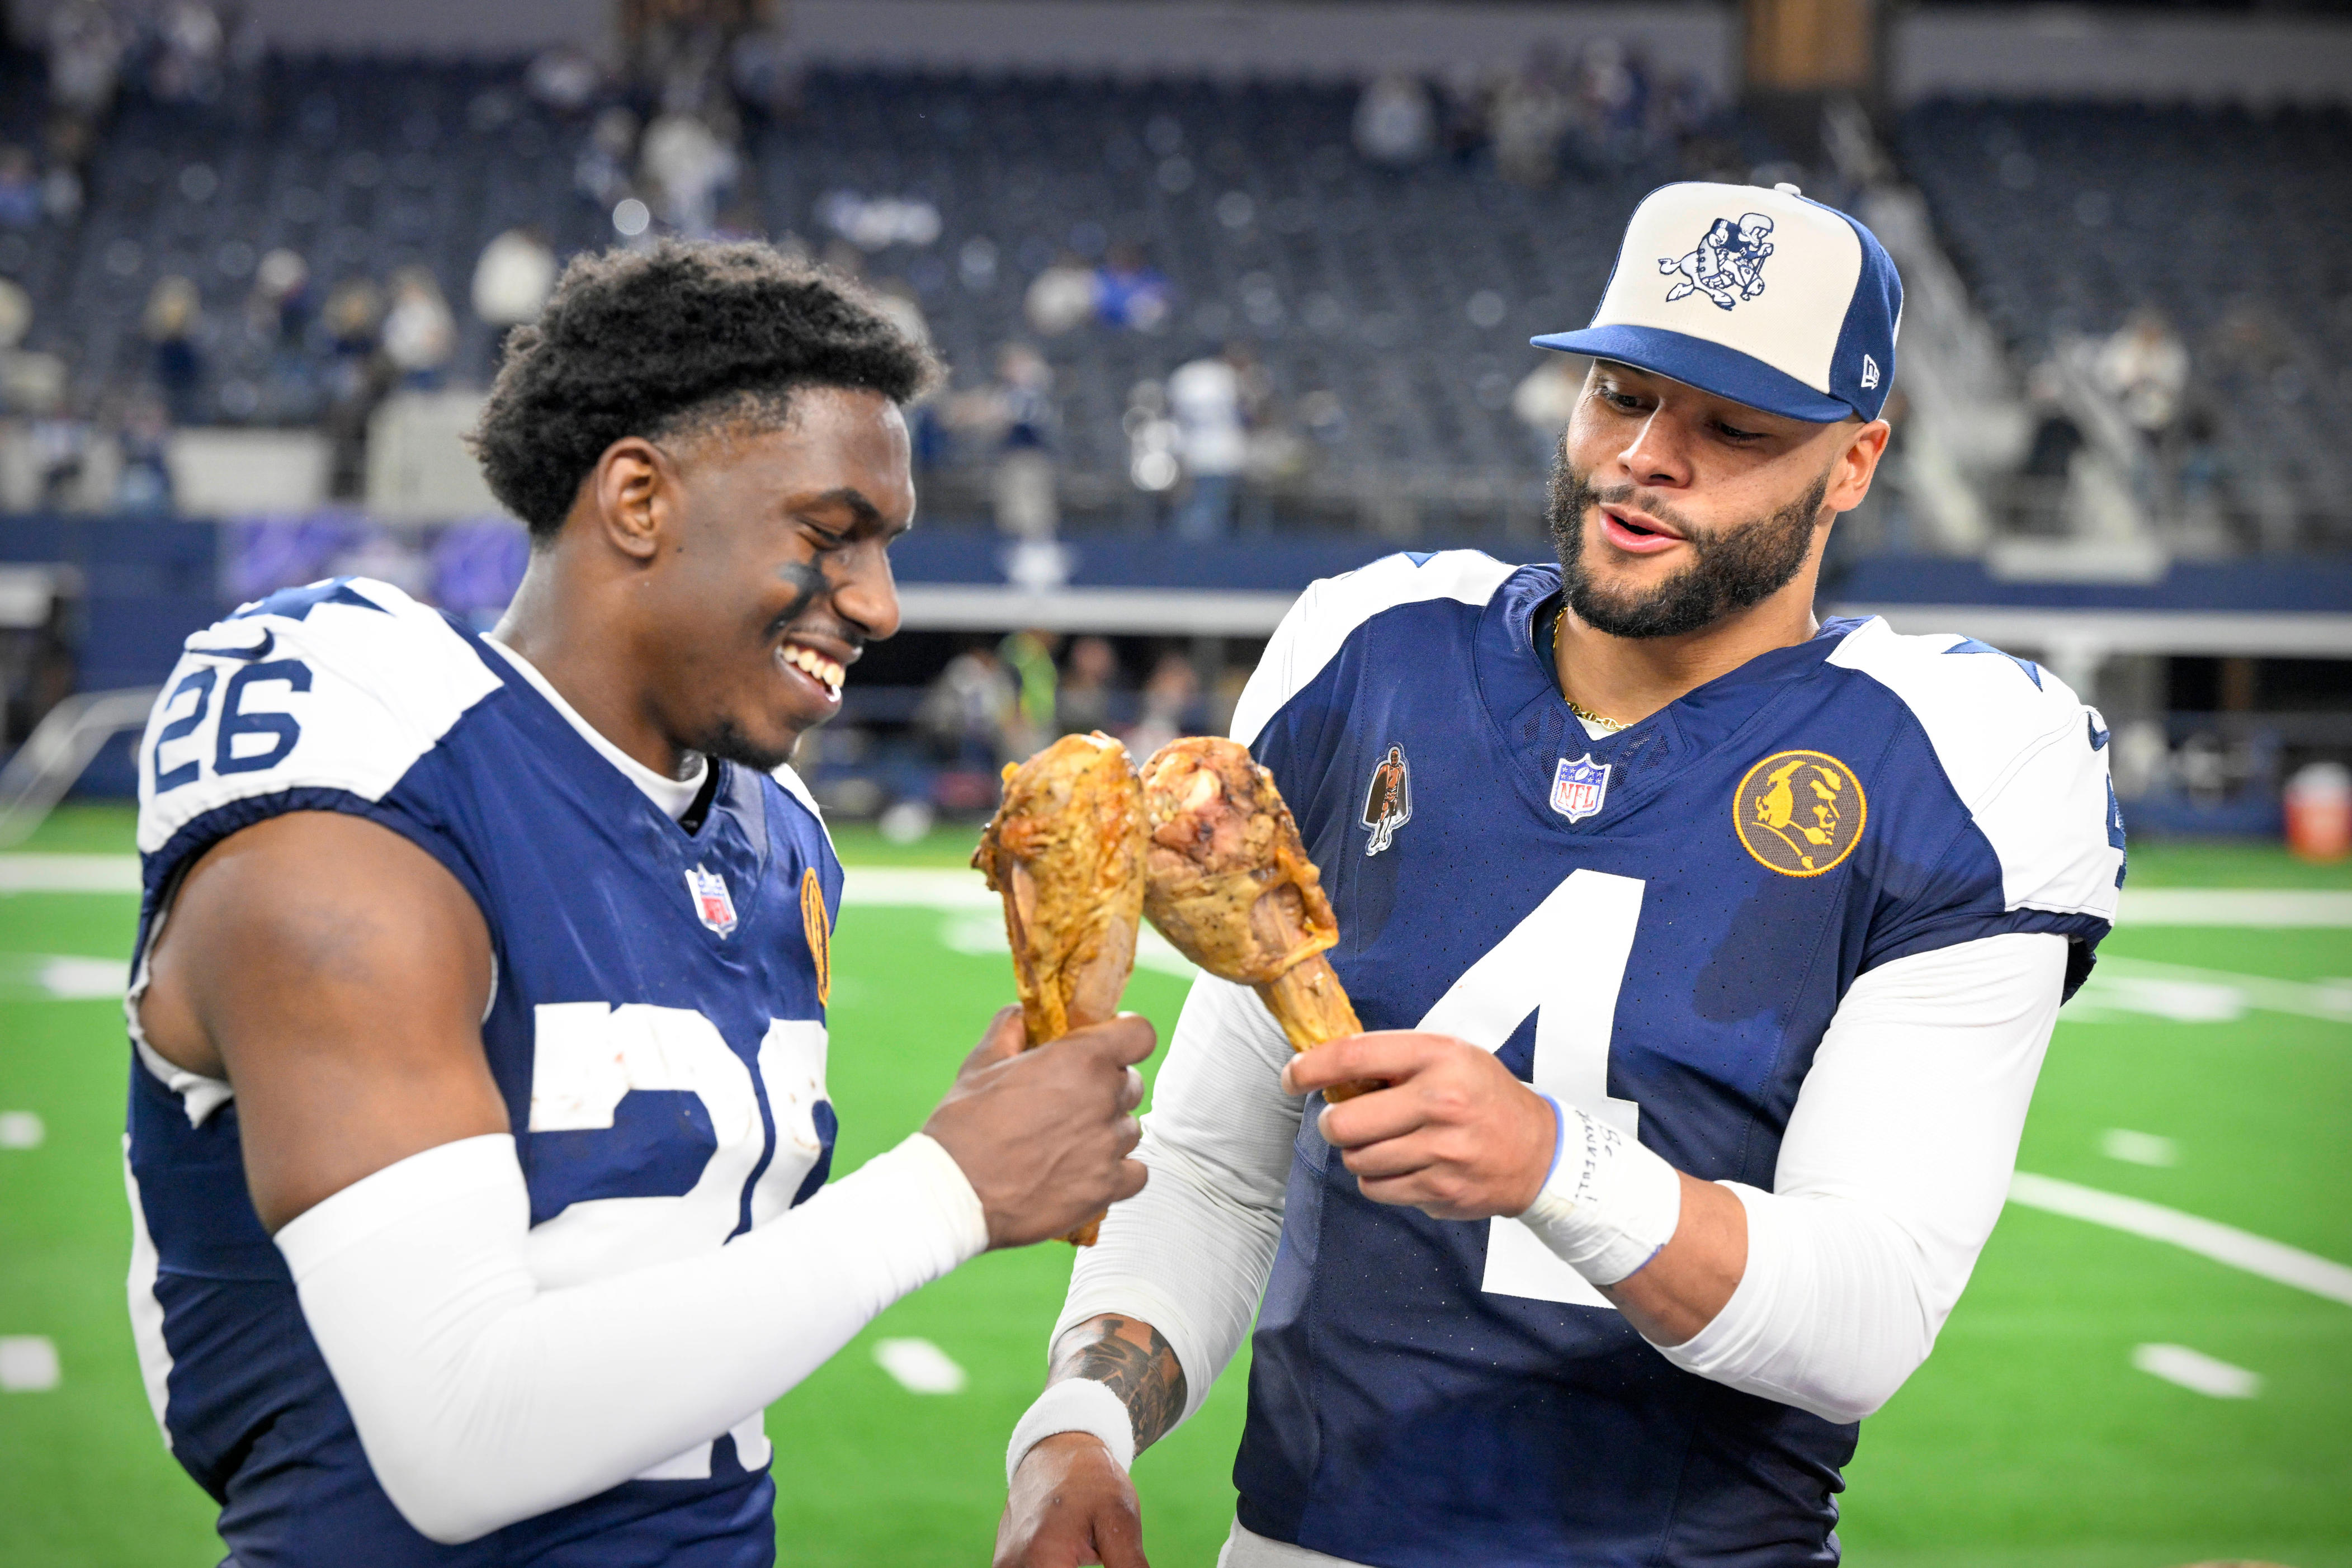 thanksgiving nfl games winners and losers: 49ers and cowboys impress, lions not so much